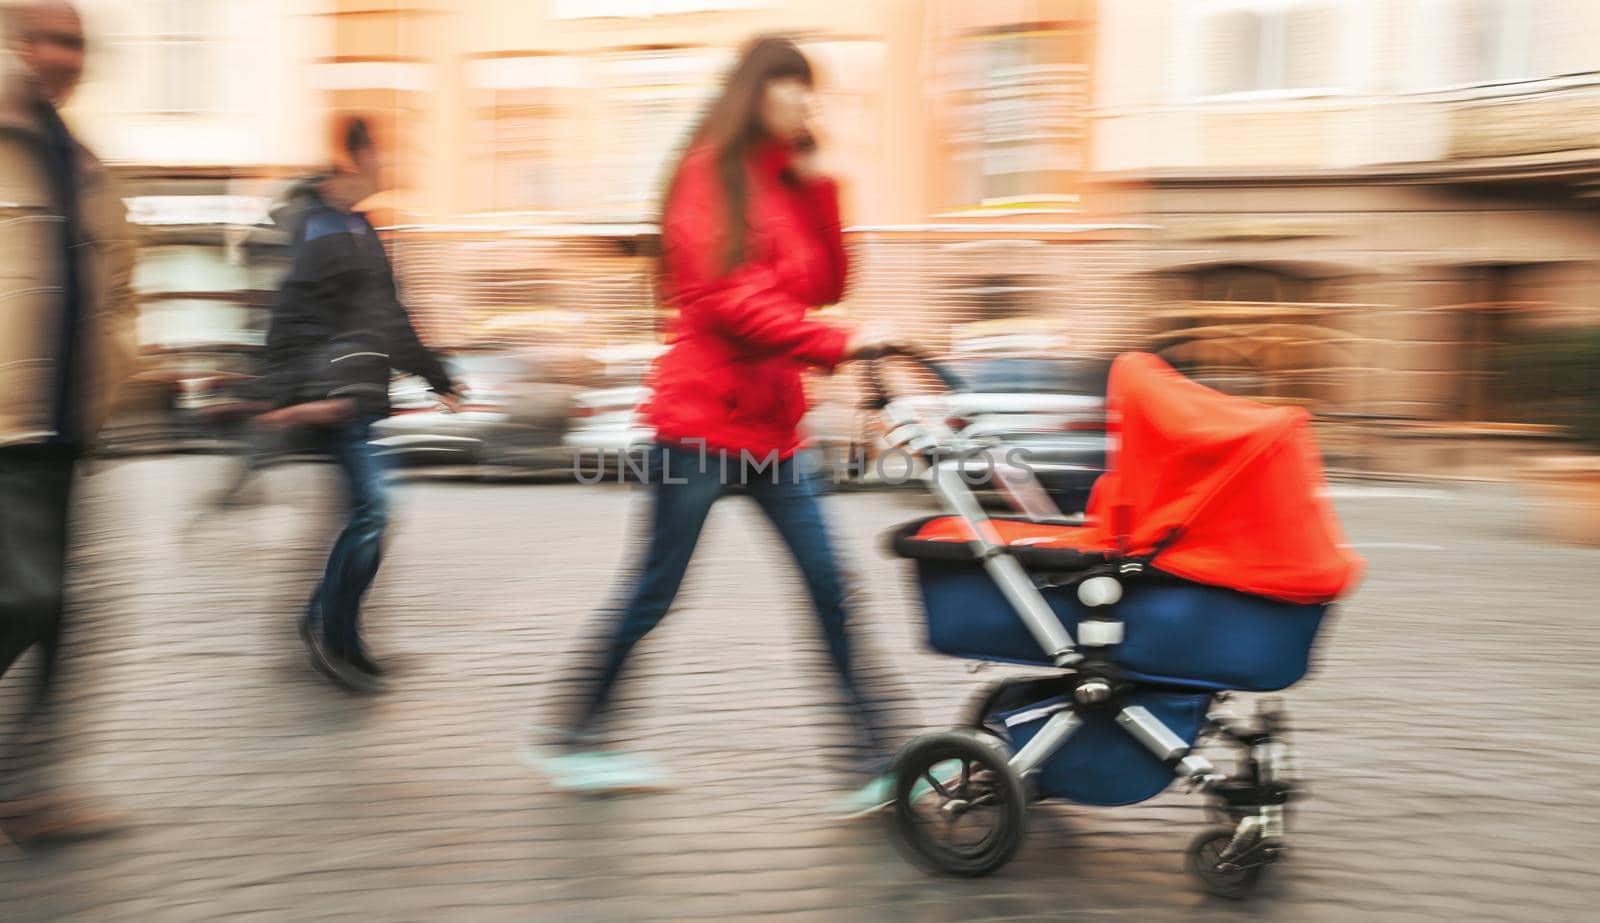 Mother with small children and a pram walking down the street. Intentional motion blur